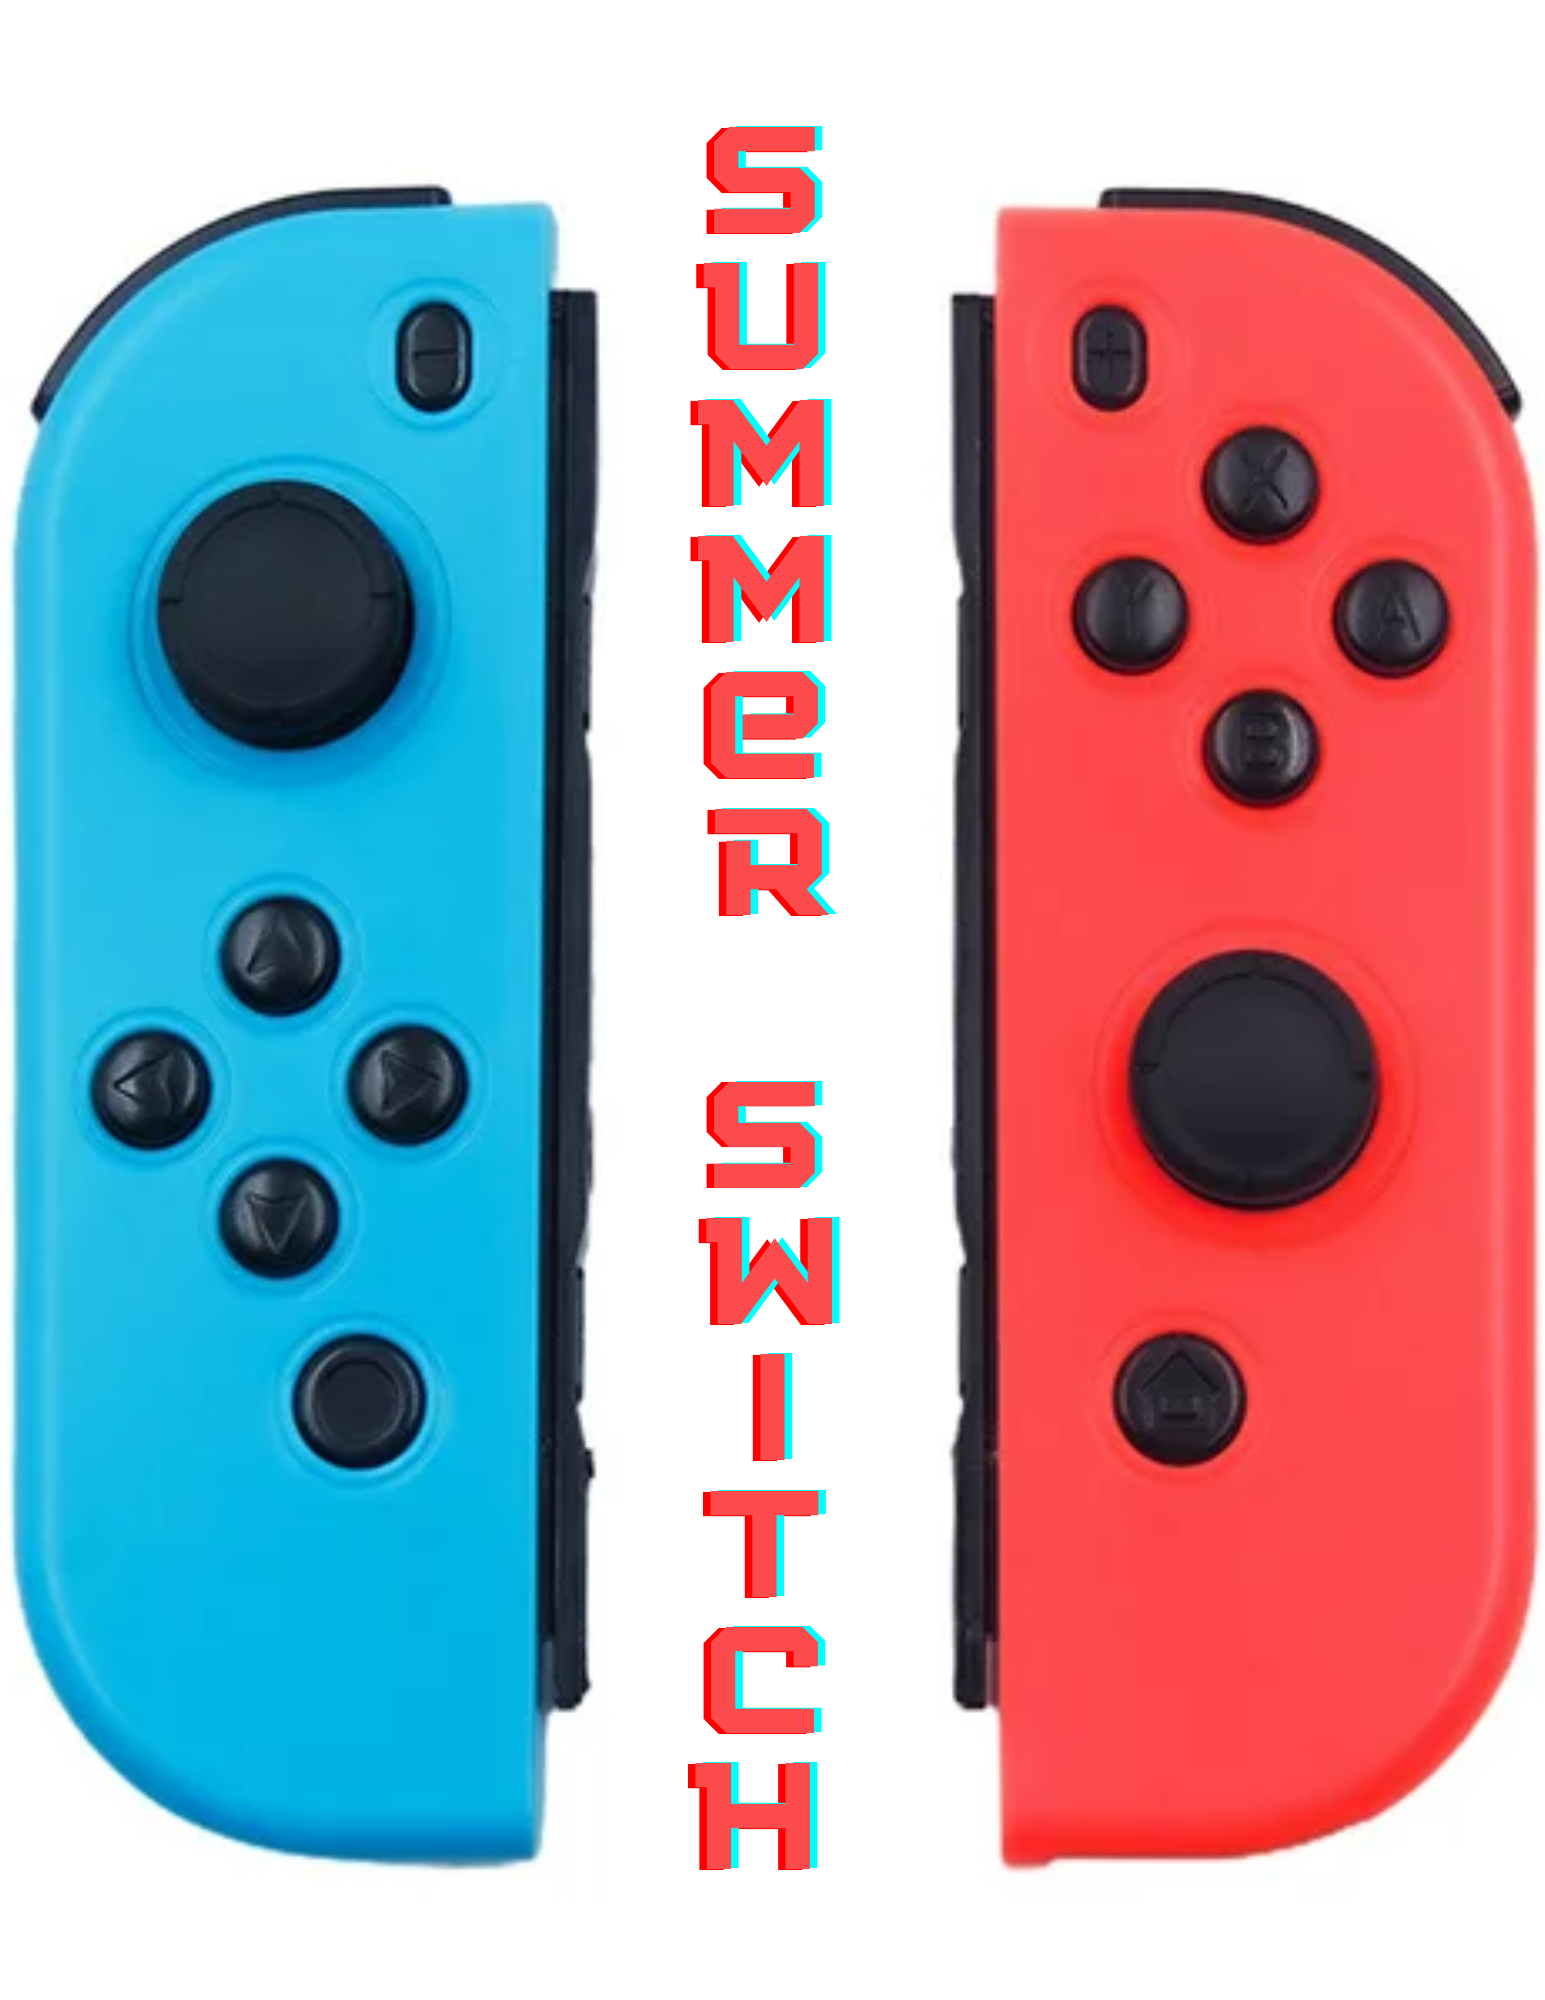 Image of Nintendo Switch controllers 